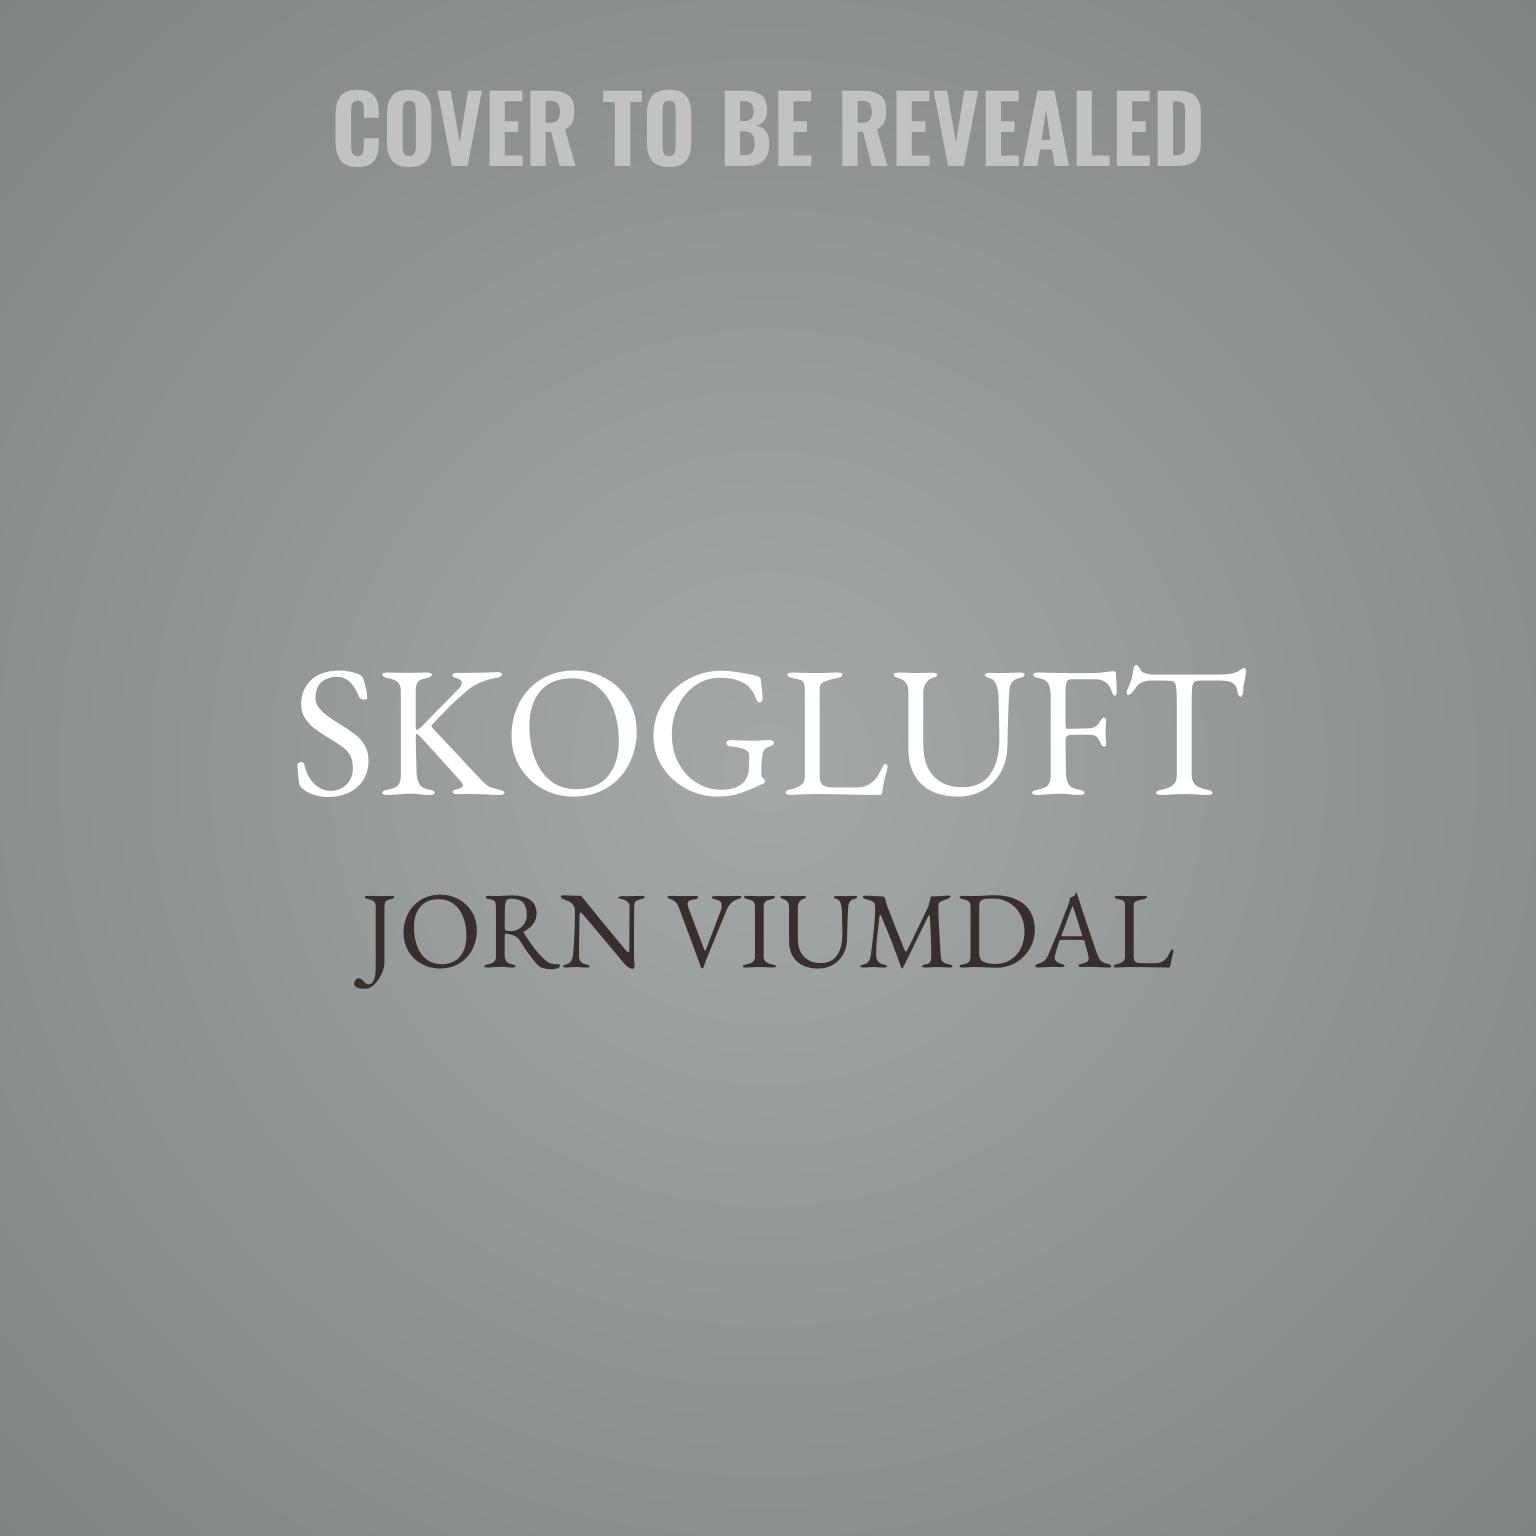 Skogluft: Norwegian Secrets for Bringing Natural Air and Light into Your Home and Office to Dramatically Improve Health and Happiness Audiobook, by Jorn Viumdal